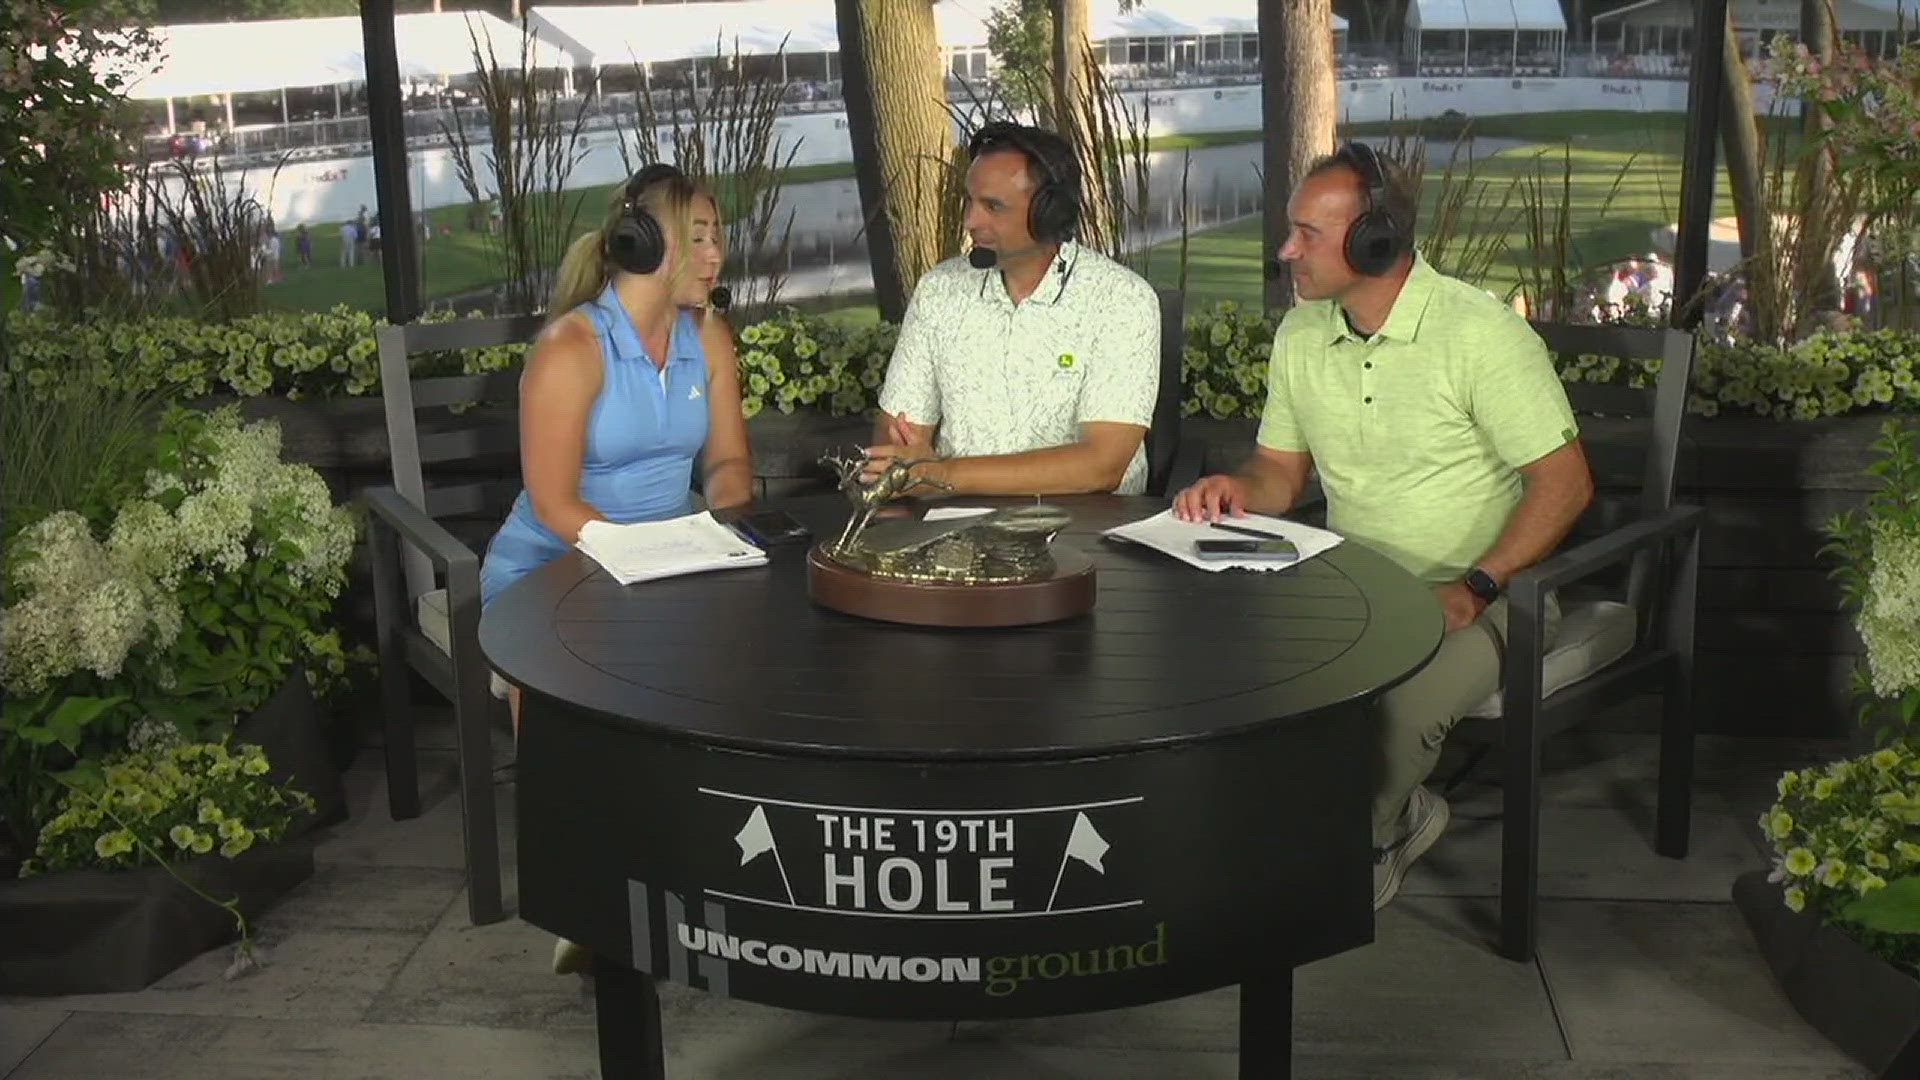 News 8 Sports' Matt Randazzo and Kory Kuffler sit down with Celia Palermo, who now works for the PGA Tour, and talk predictions for the John Deere Classic.